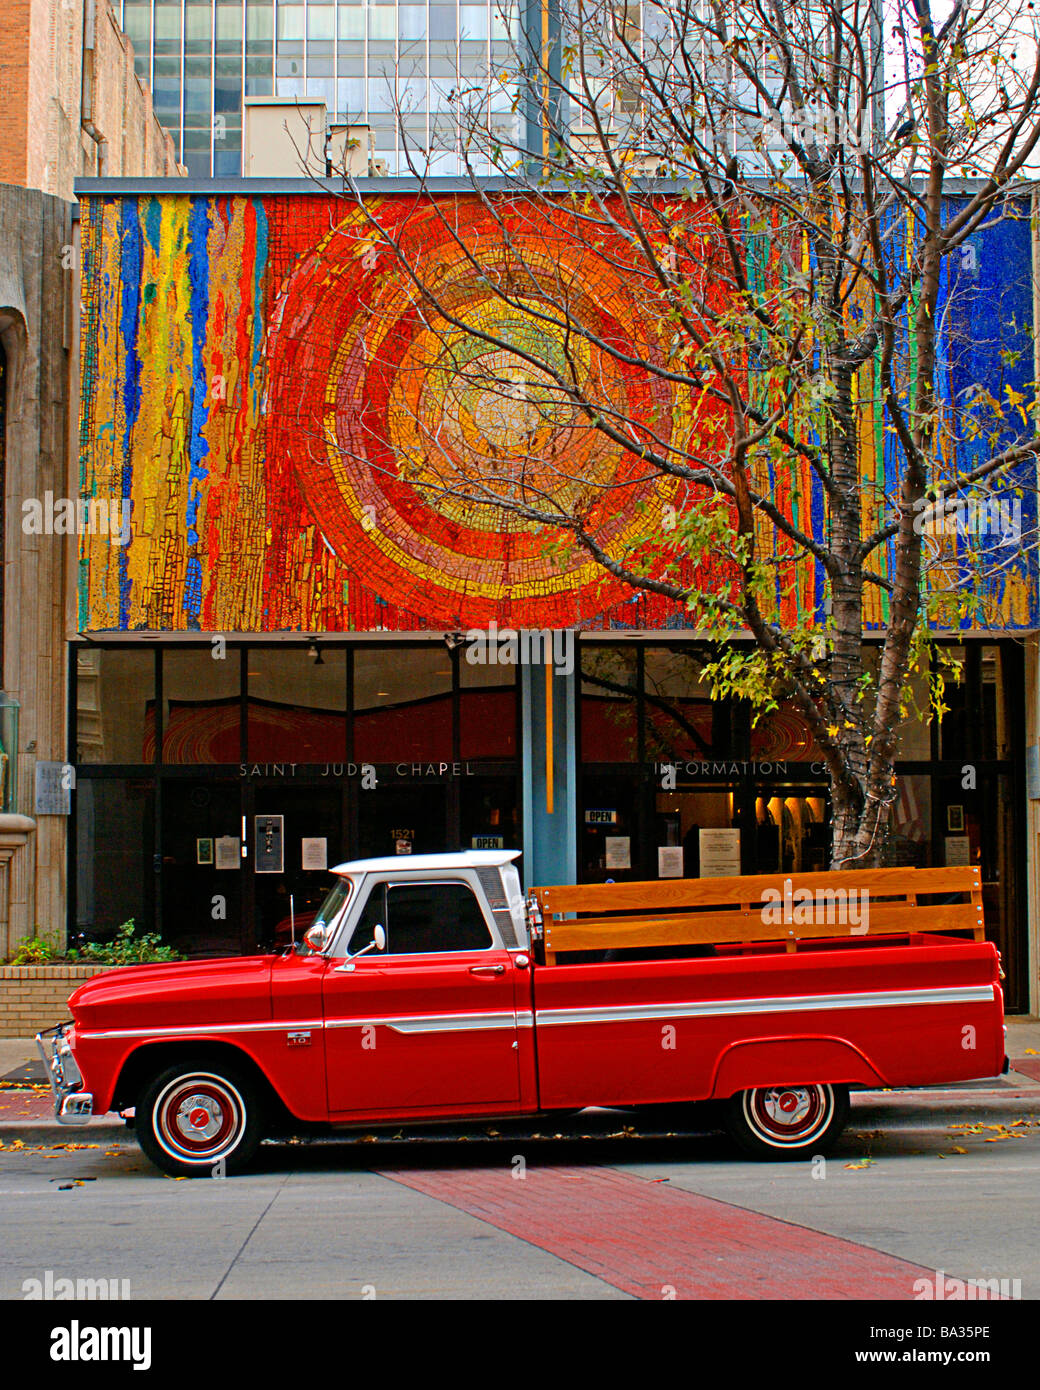 Bright red orange chevy pickup truck with wooden bed railing, parked on a city street. Stock Photo